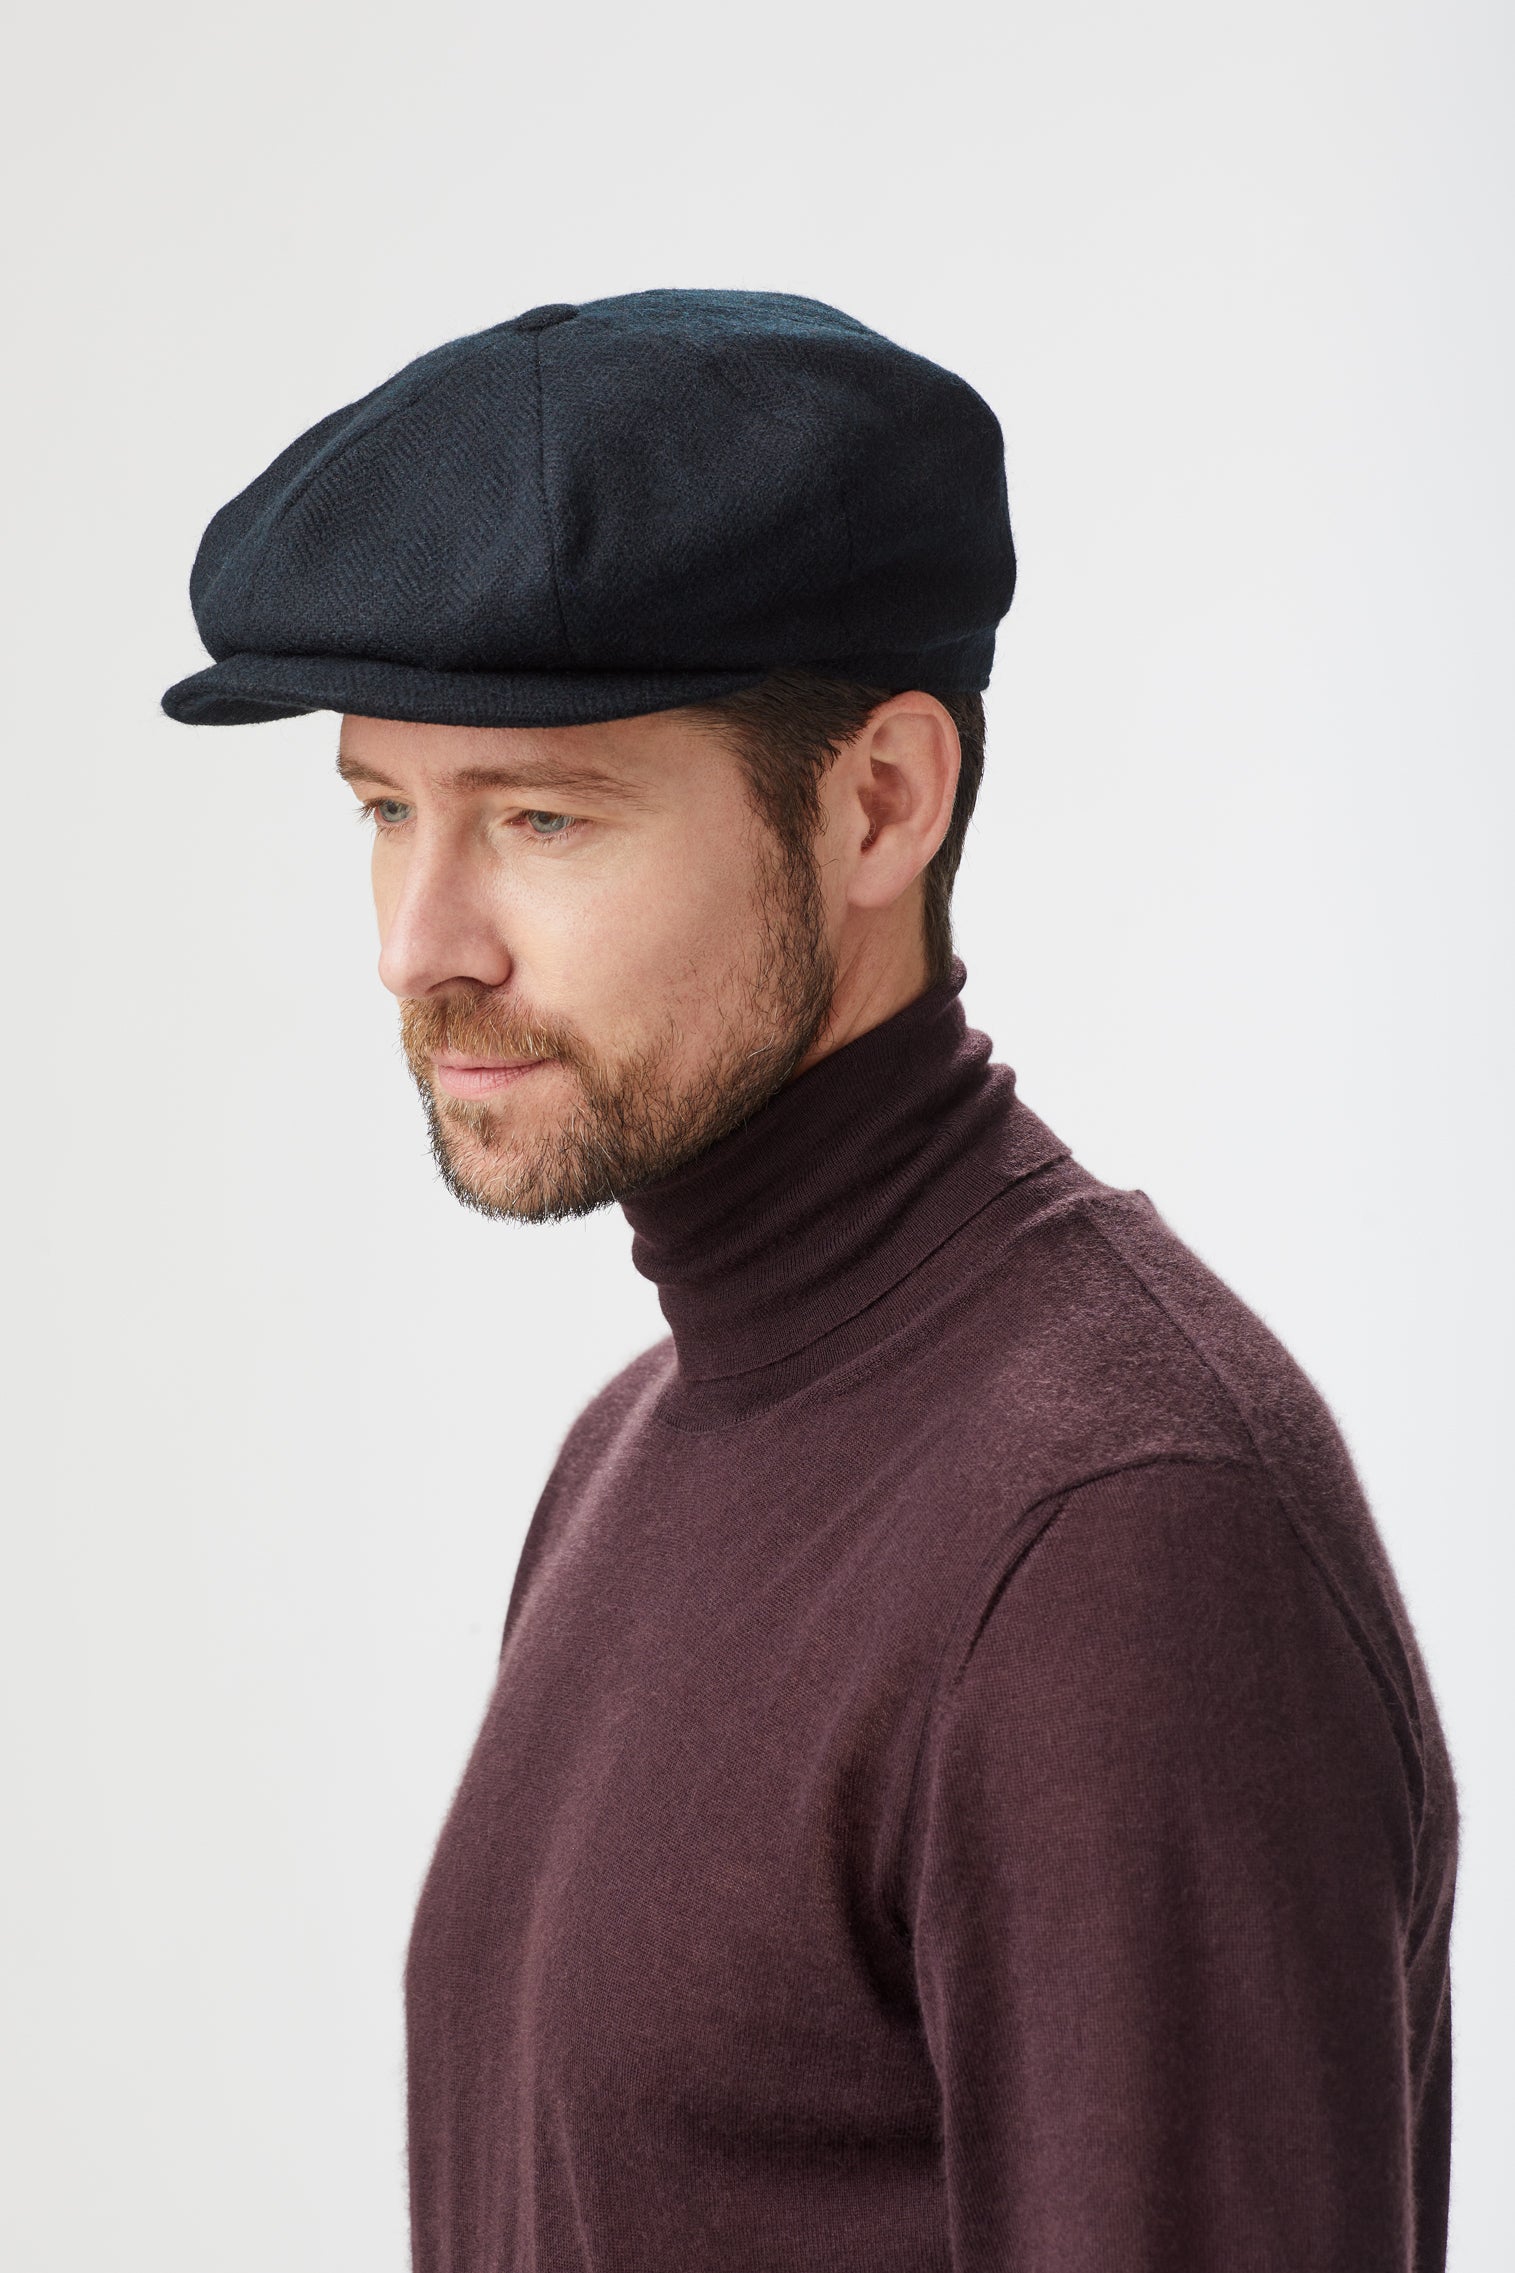 Tremelo Black Bakerboy Cap - Hats for Oval Face Shapes - Lock & Co. Hatters London UK